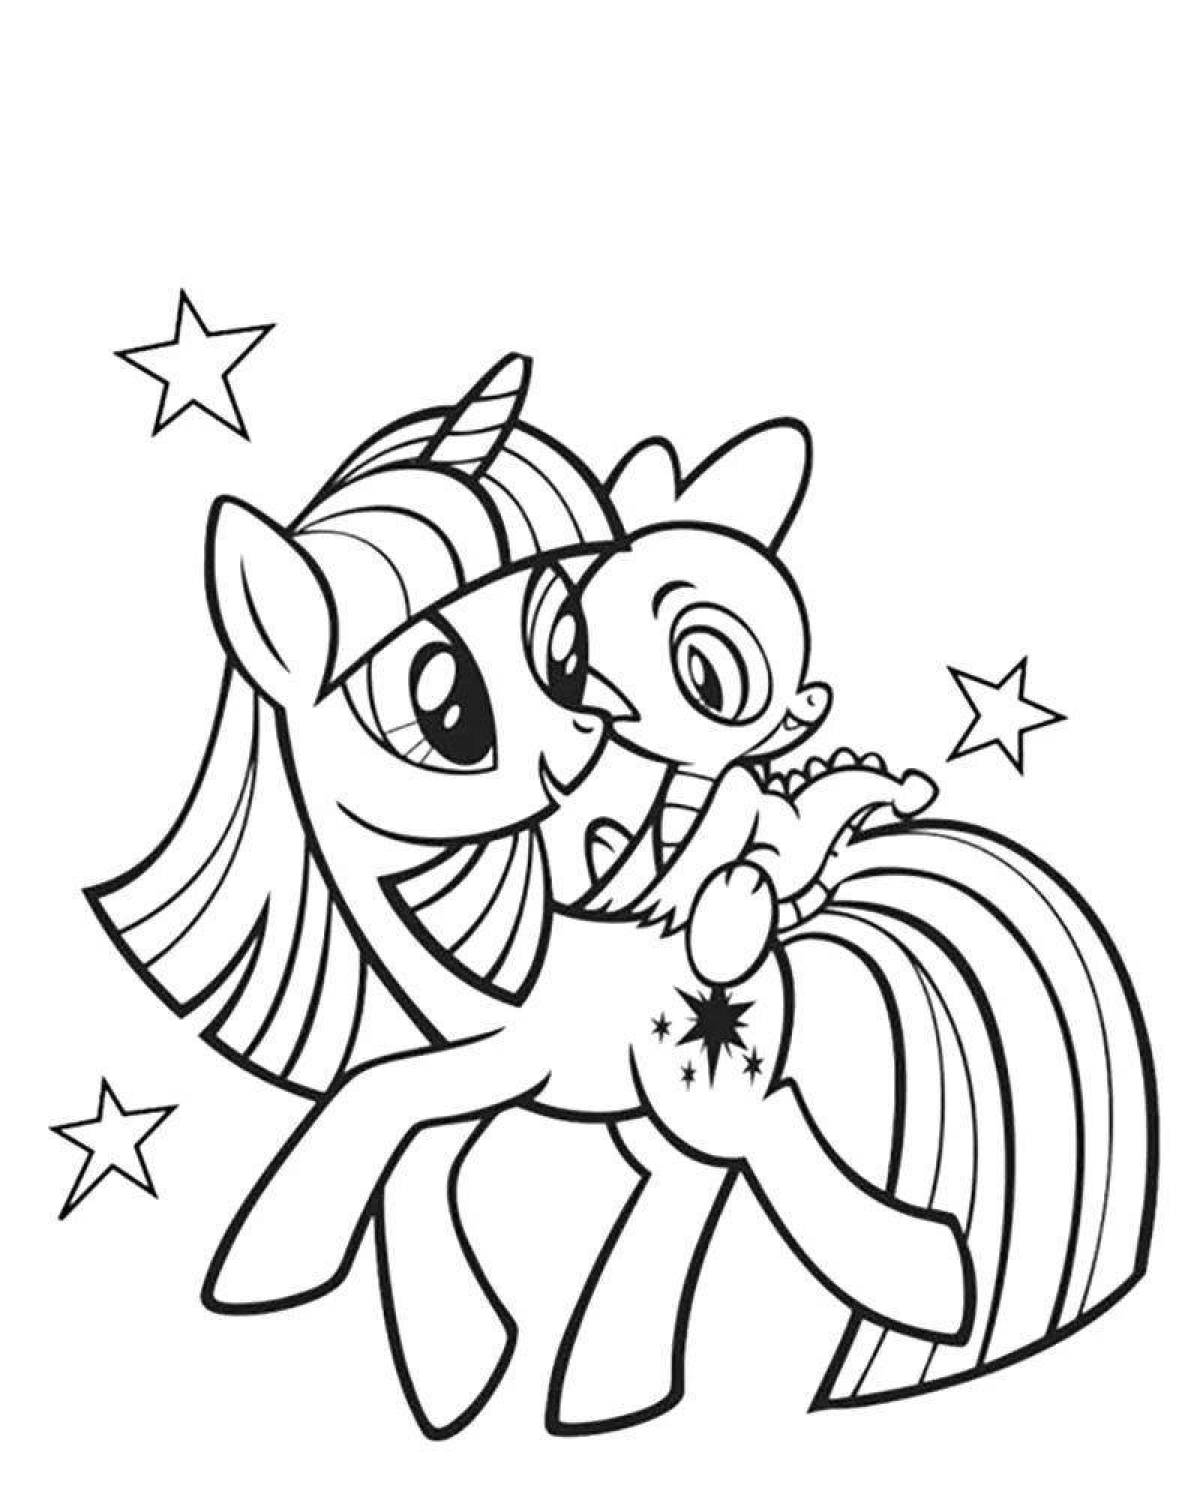 Glitter twilight sparkle coloring page